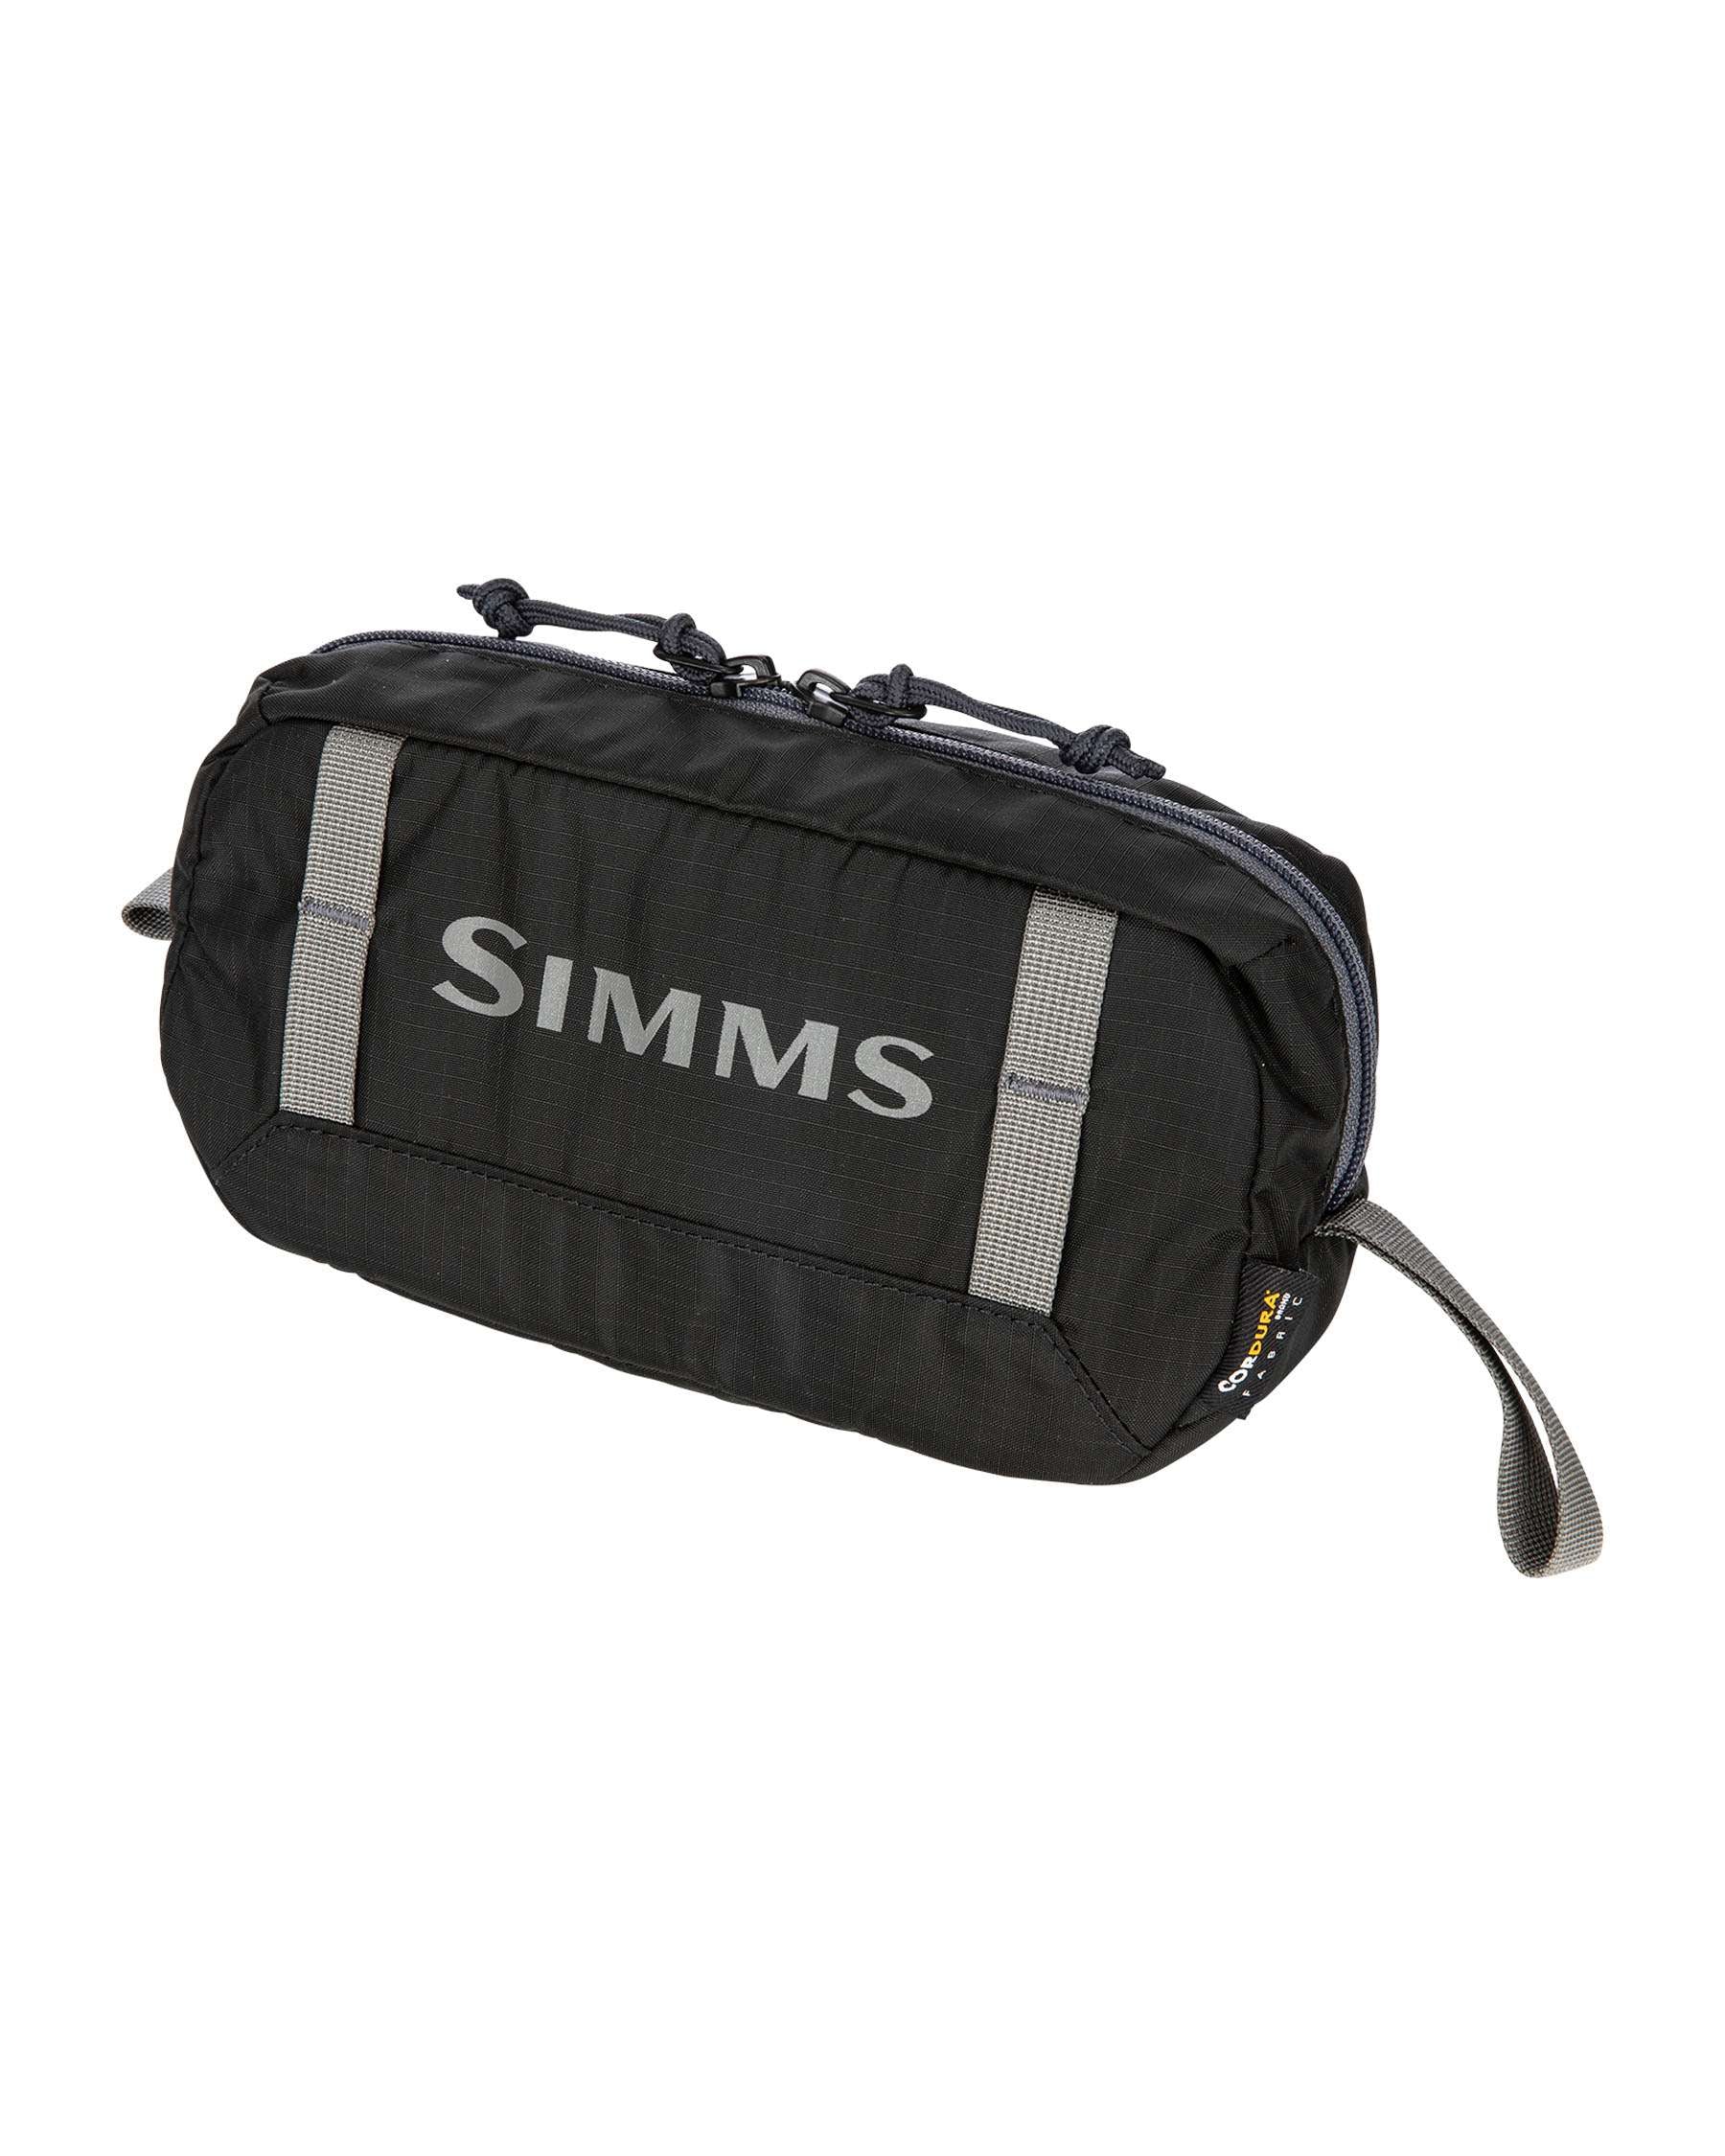 Simms GTS Padded Cube - Fin & Fire Fly Shop